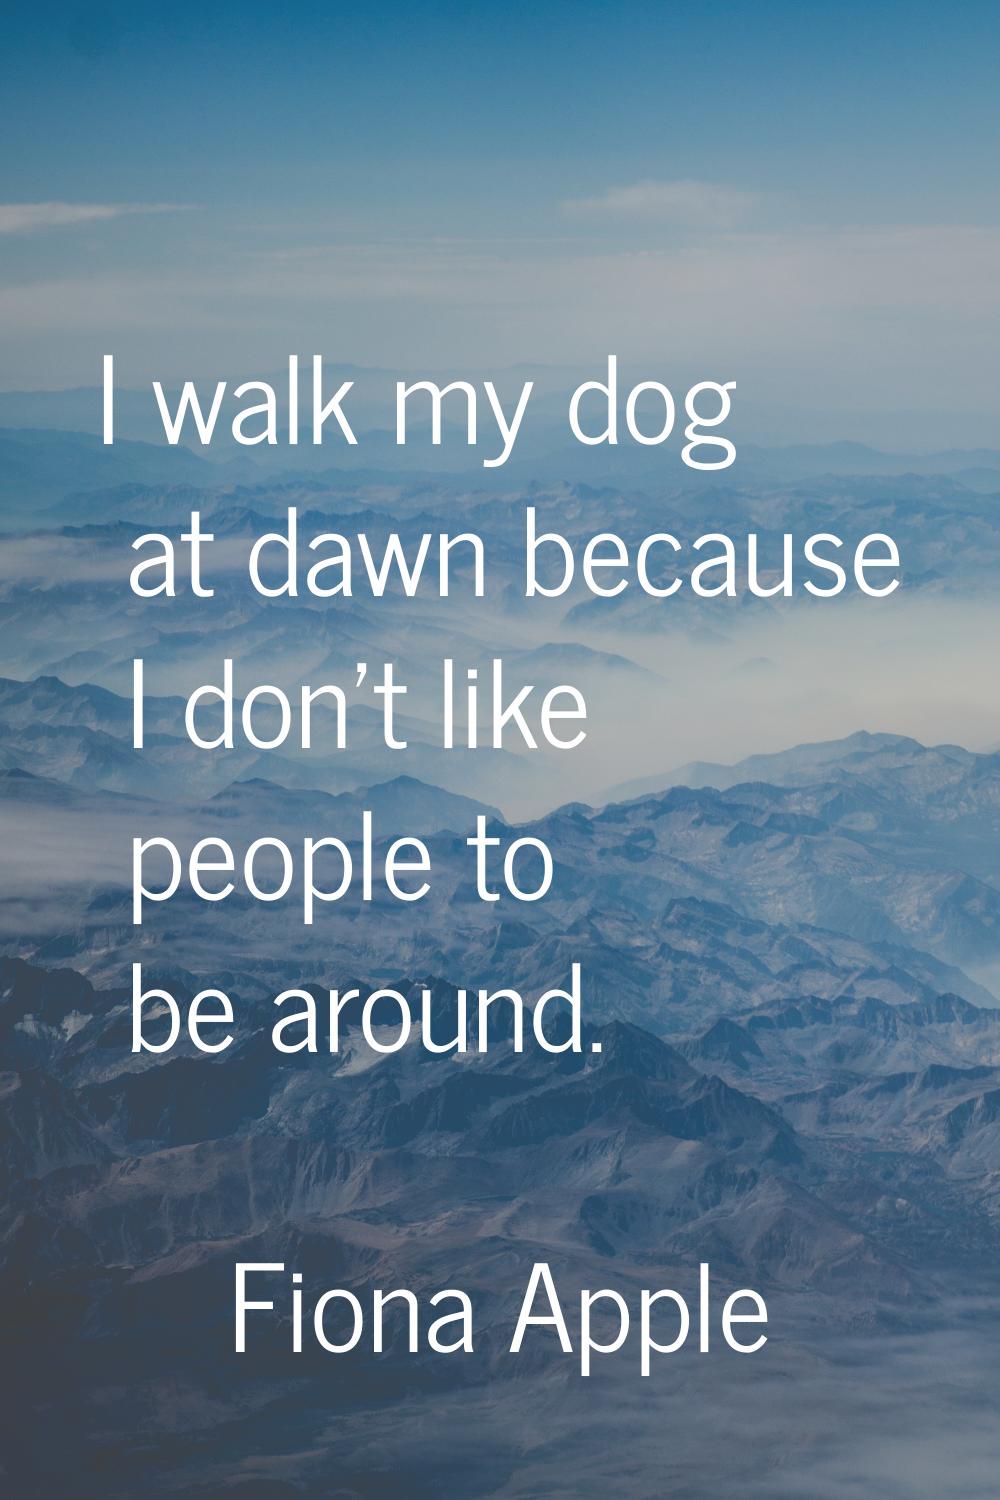 I walk my dog at dawn because I don't like people to be around.